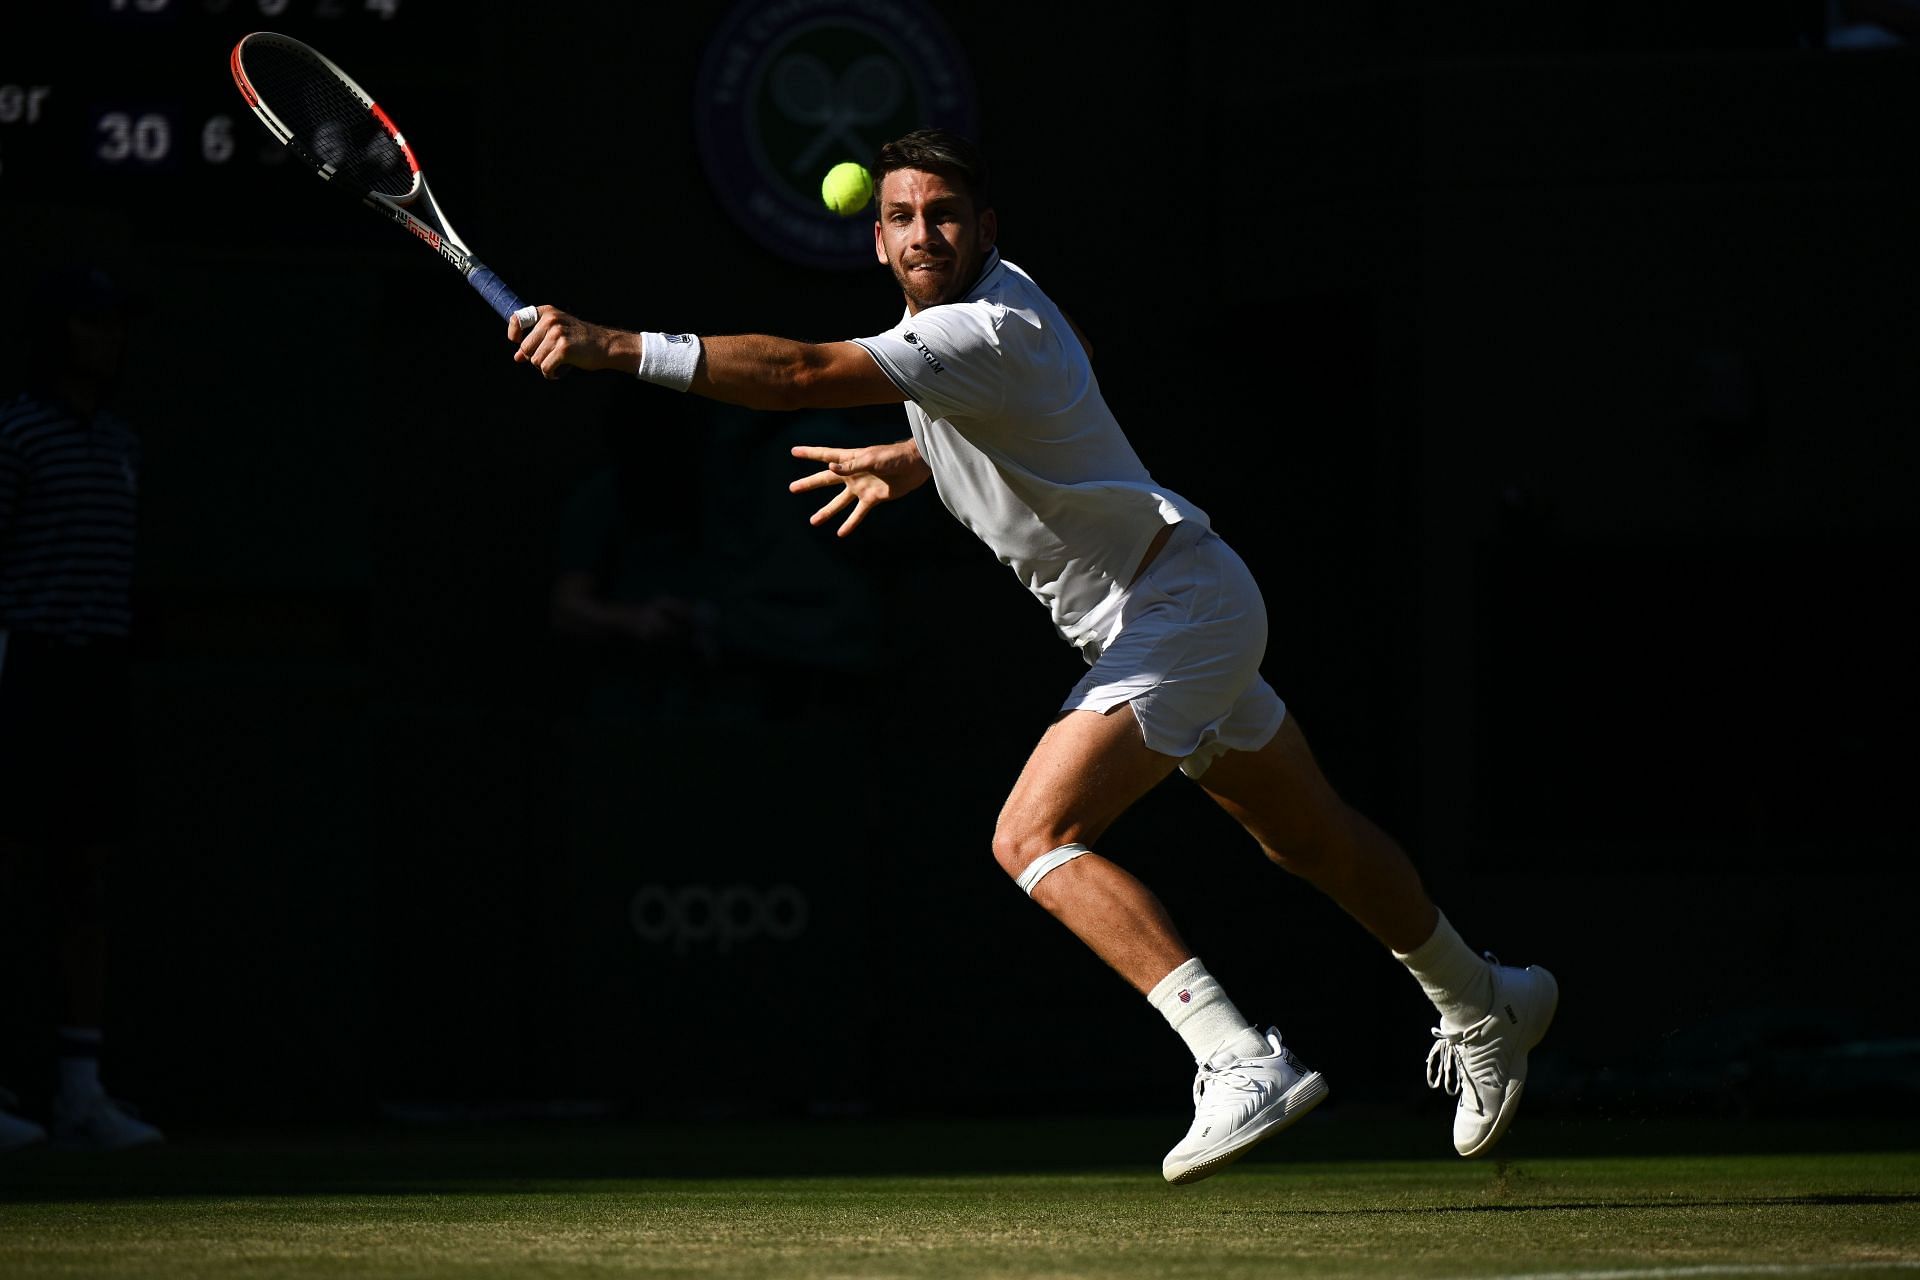 Cameron Norrie in action at Wimbledon